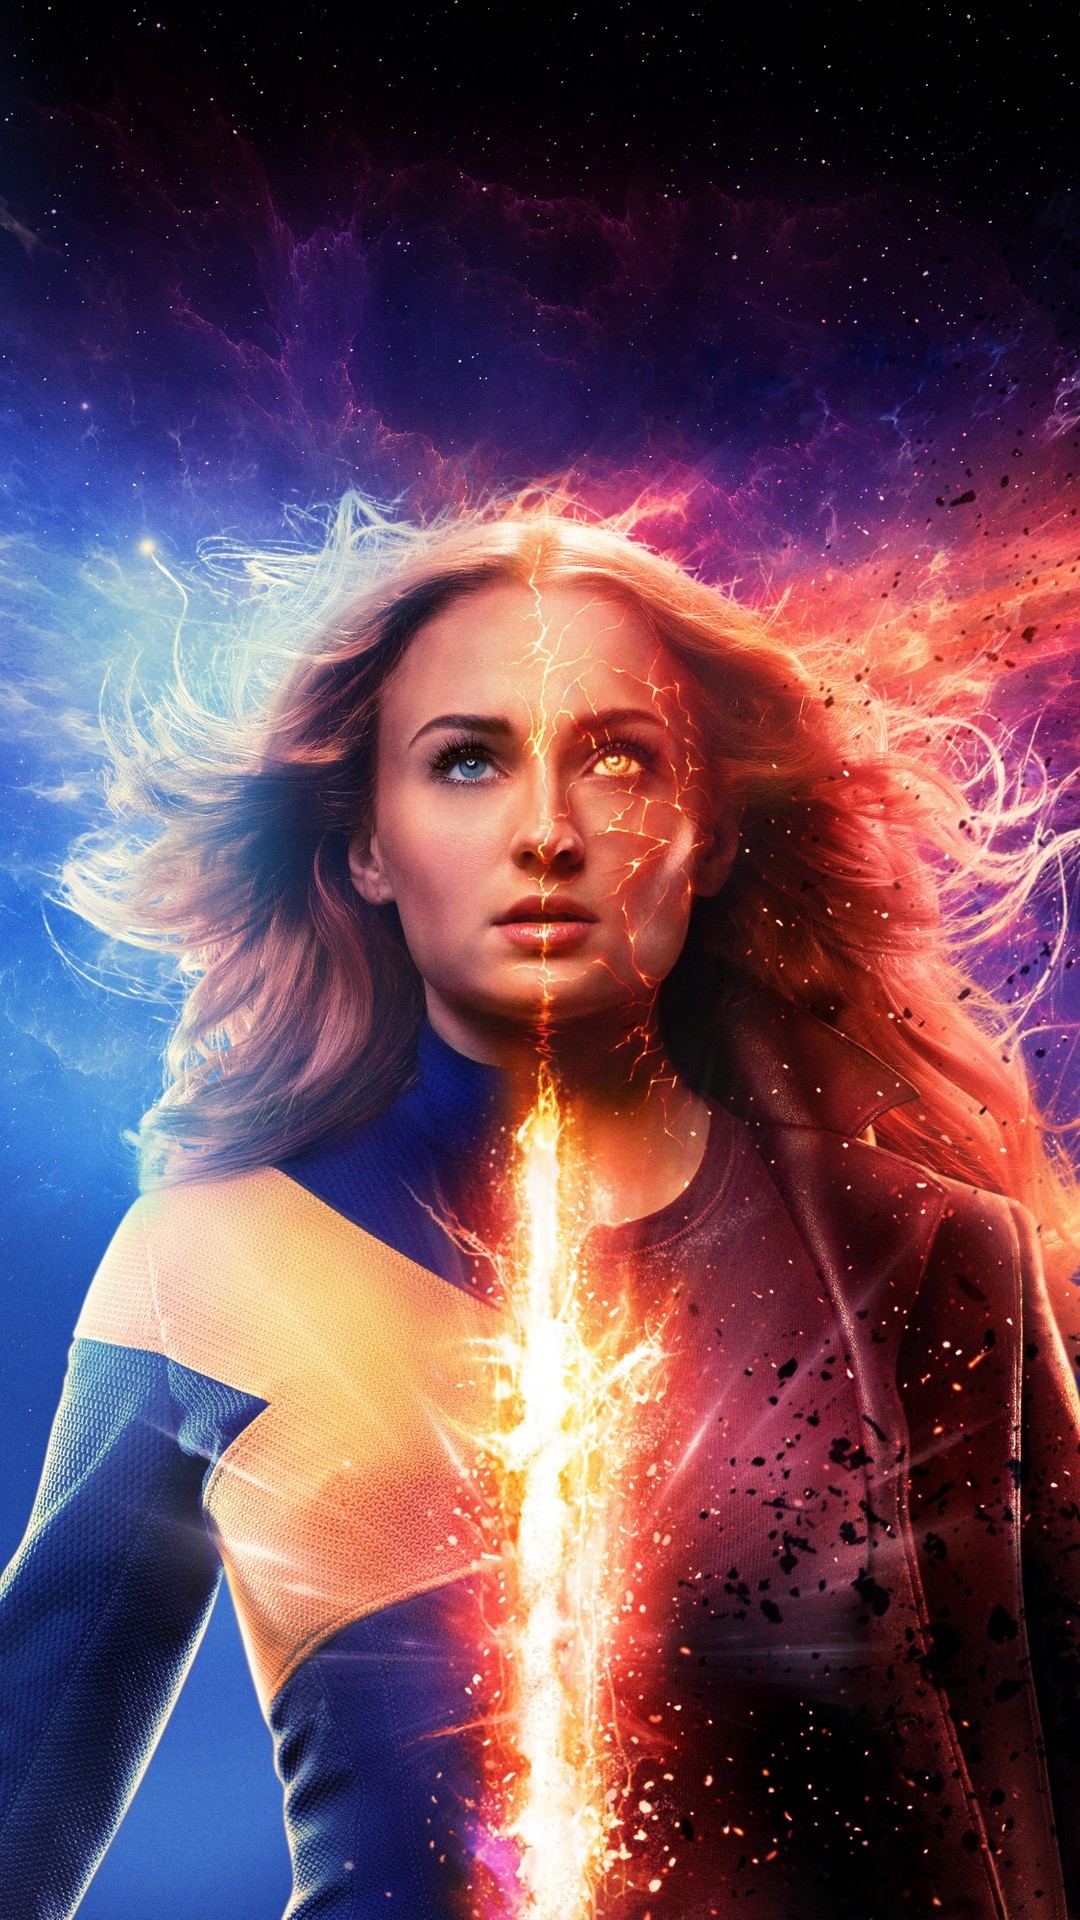 Wallpaper Dark Phoenix 2019 Android with high-resolution 1080x1920 pixel. You can use this wallpaper for your Android backgrounds, Tablet, Samsung Screensavers, Mobile Phone Lock Screen and another Smartphones device